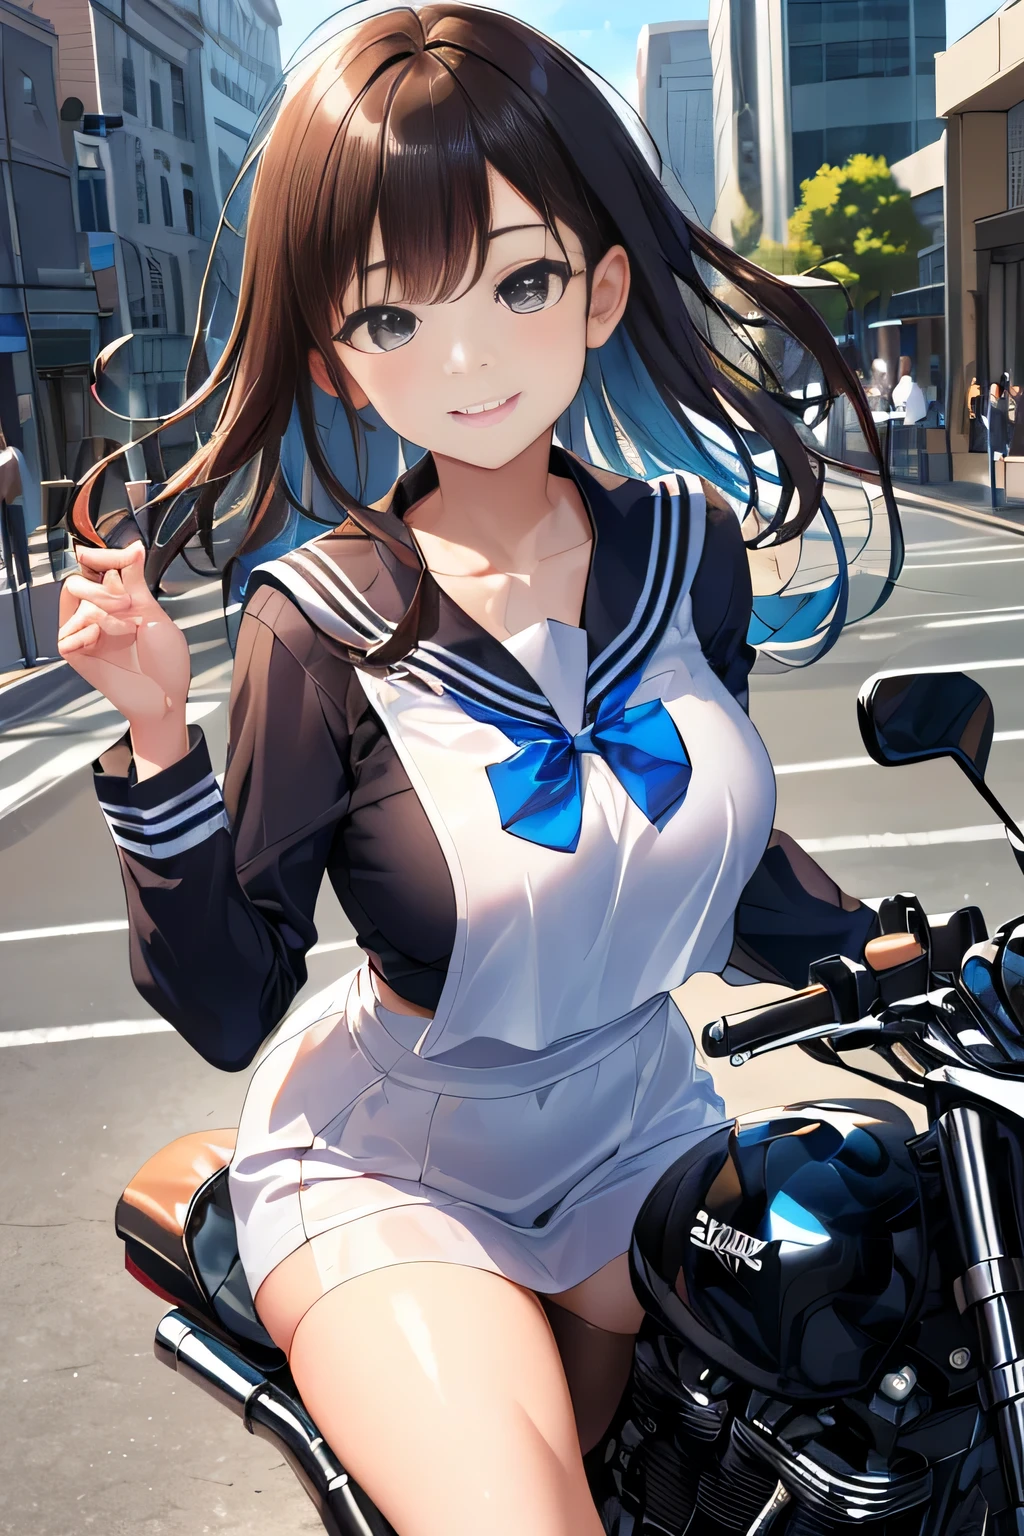 big and full breasts、(((A transparent white sailor suit that sticks to the chest,school uniform:1.7))),(((A woman wearing a transparent sailor suit:1.7 ))),(((A woman riding a colorful custom-painted motorcycle through the city:1.7))), Shiny light brown and orange striped short hair,cute smile,perfect round face,A cheerful smile that makes the viewer happy,proper body proportions,table top,Ultra high quality output image,High resolution,intricate details,very delicate and beautiful hair,realistic pictures,dream-like,professional lighting,realistic shadow,focus only,beautiful hands,beautiful fingers,Detailed functions of fingers,Detailed features of the wear,Detailed characteristics of hair,detailed facial features,(((emphasize the chest:1.3))),(dynamic angle),(dynamic and sexy pose),laughter、cute round face,,(table top,highest quality,Ultra-high resolution output image,) ,(8K quality,),(sea art 2 mode.1),(Image Mode Ultra HD,)